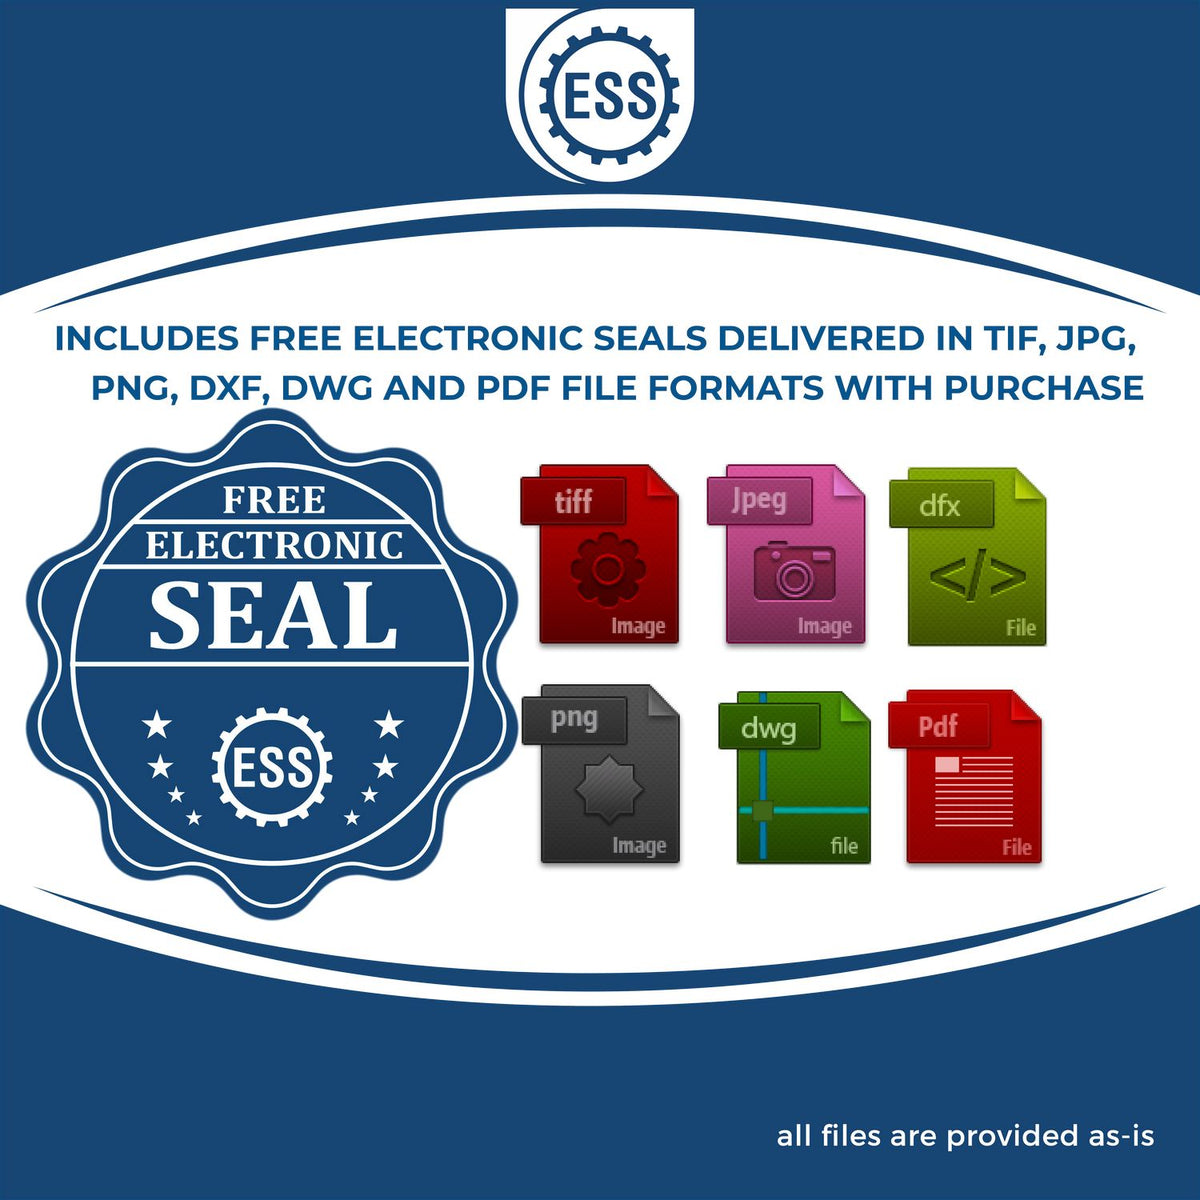 An infographic for the free electronic seal for the Gift Louisiana Landscape Architect Seal illustrating the different file type icons such as DXF, DWG, TIF, JPG and PNG.